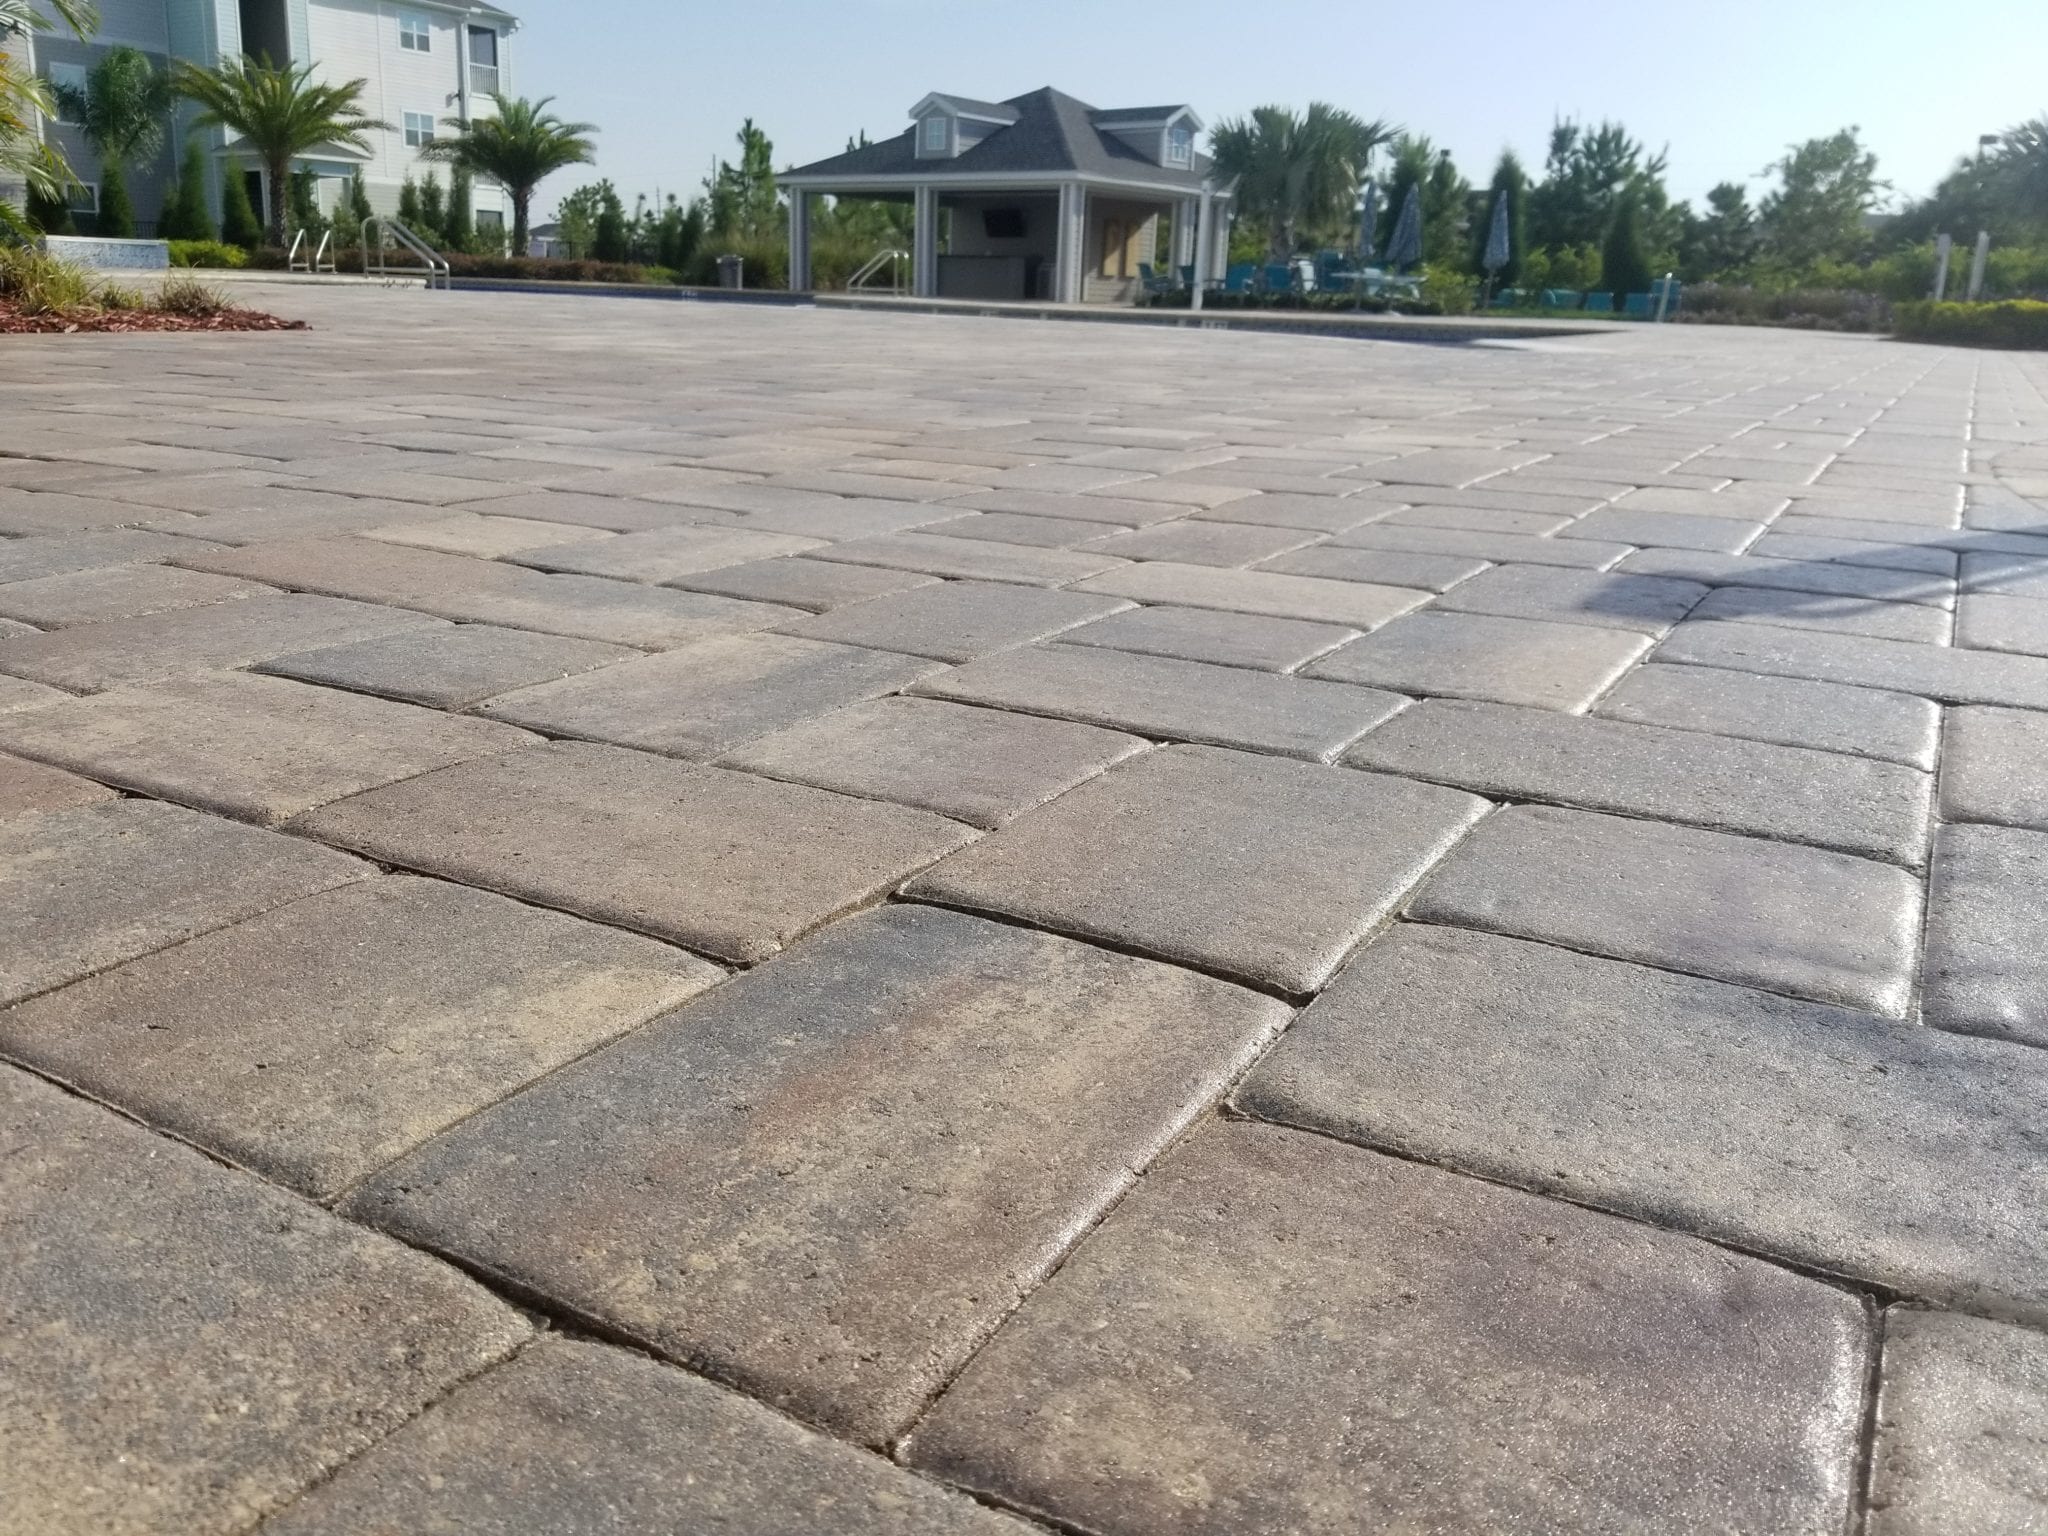 With the right maintenance plan in place, your pavers should last – and look beautiful – for years. Our paver sealing service is a key part of that maintenance plan. We always use a three-step process that will keep your pavers clean, attractive, and well-protected: